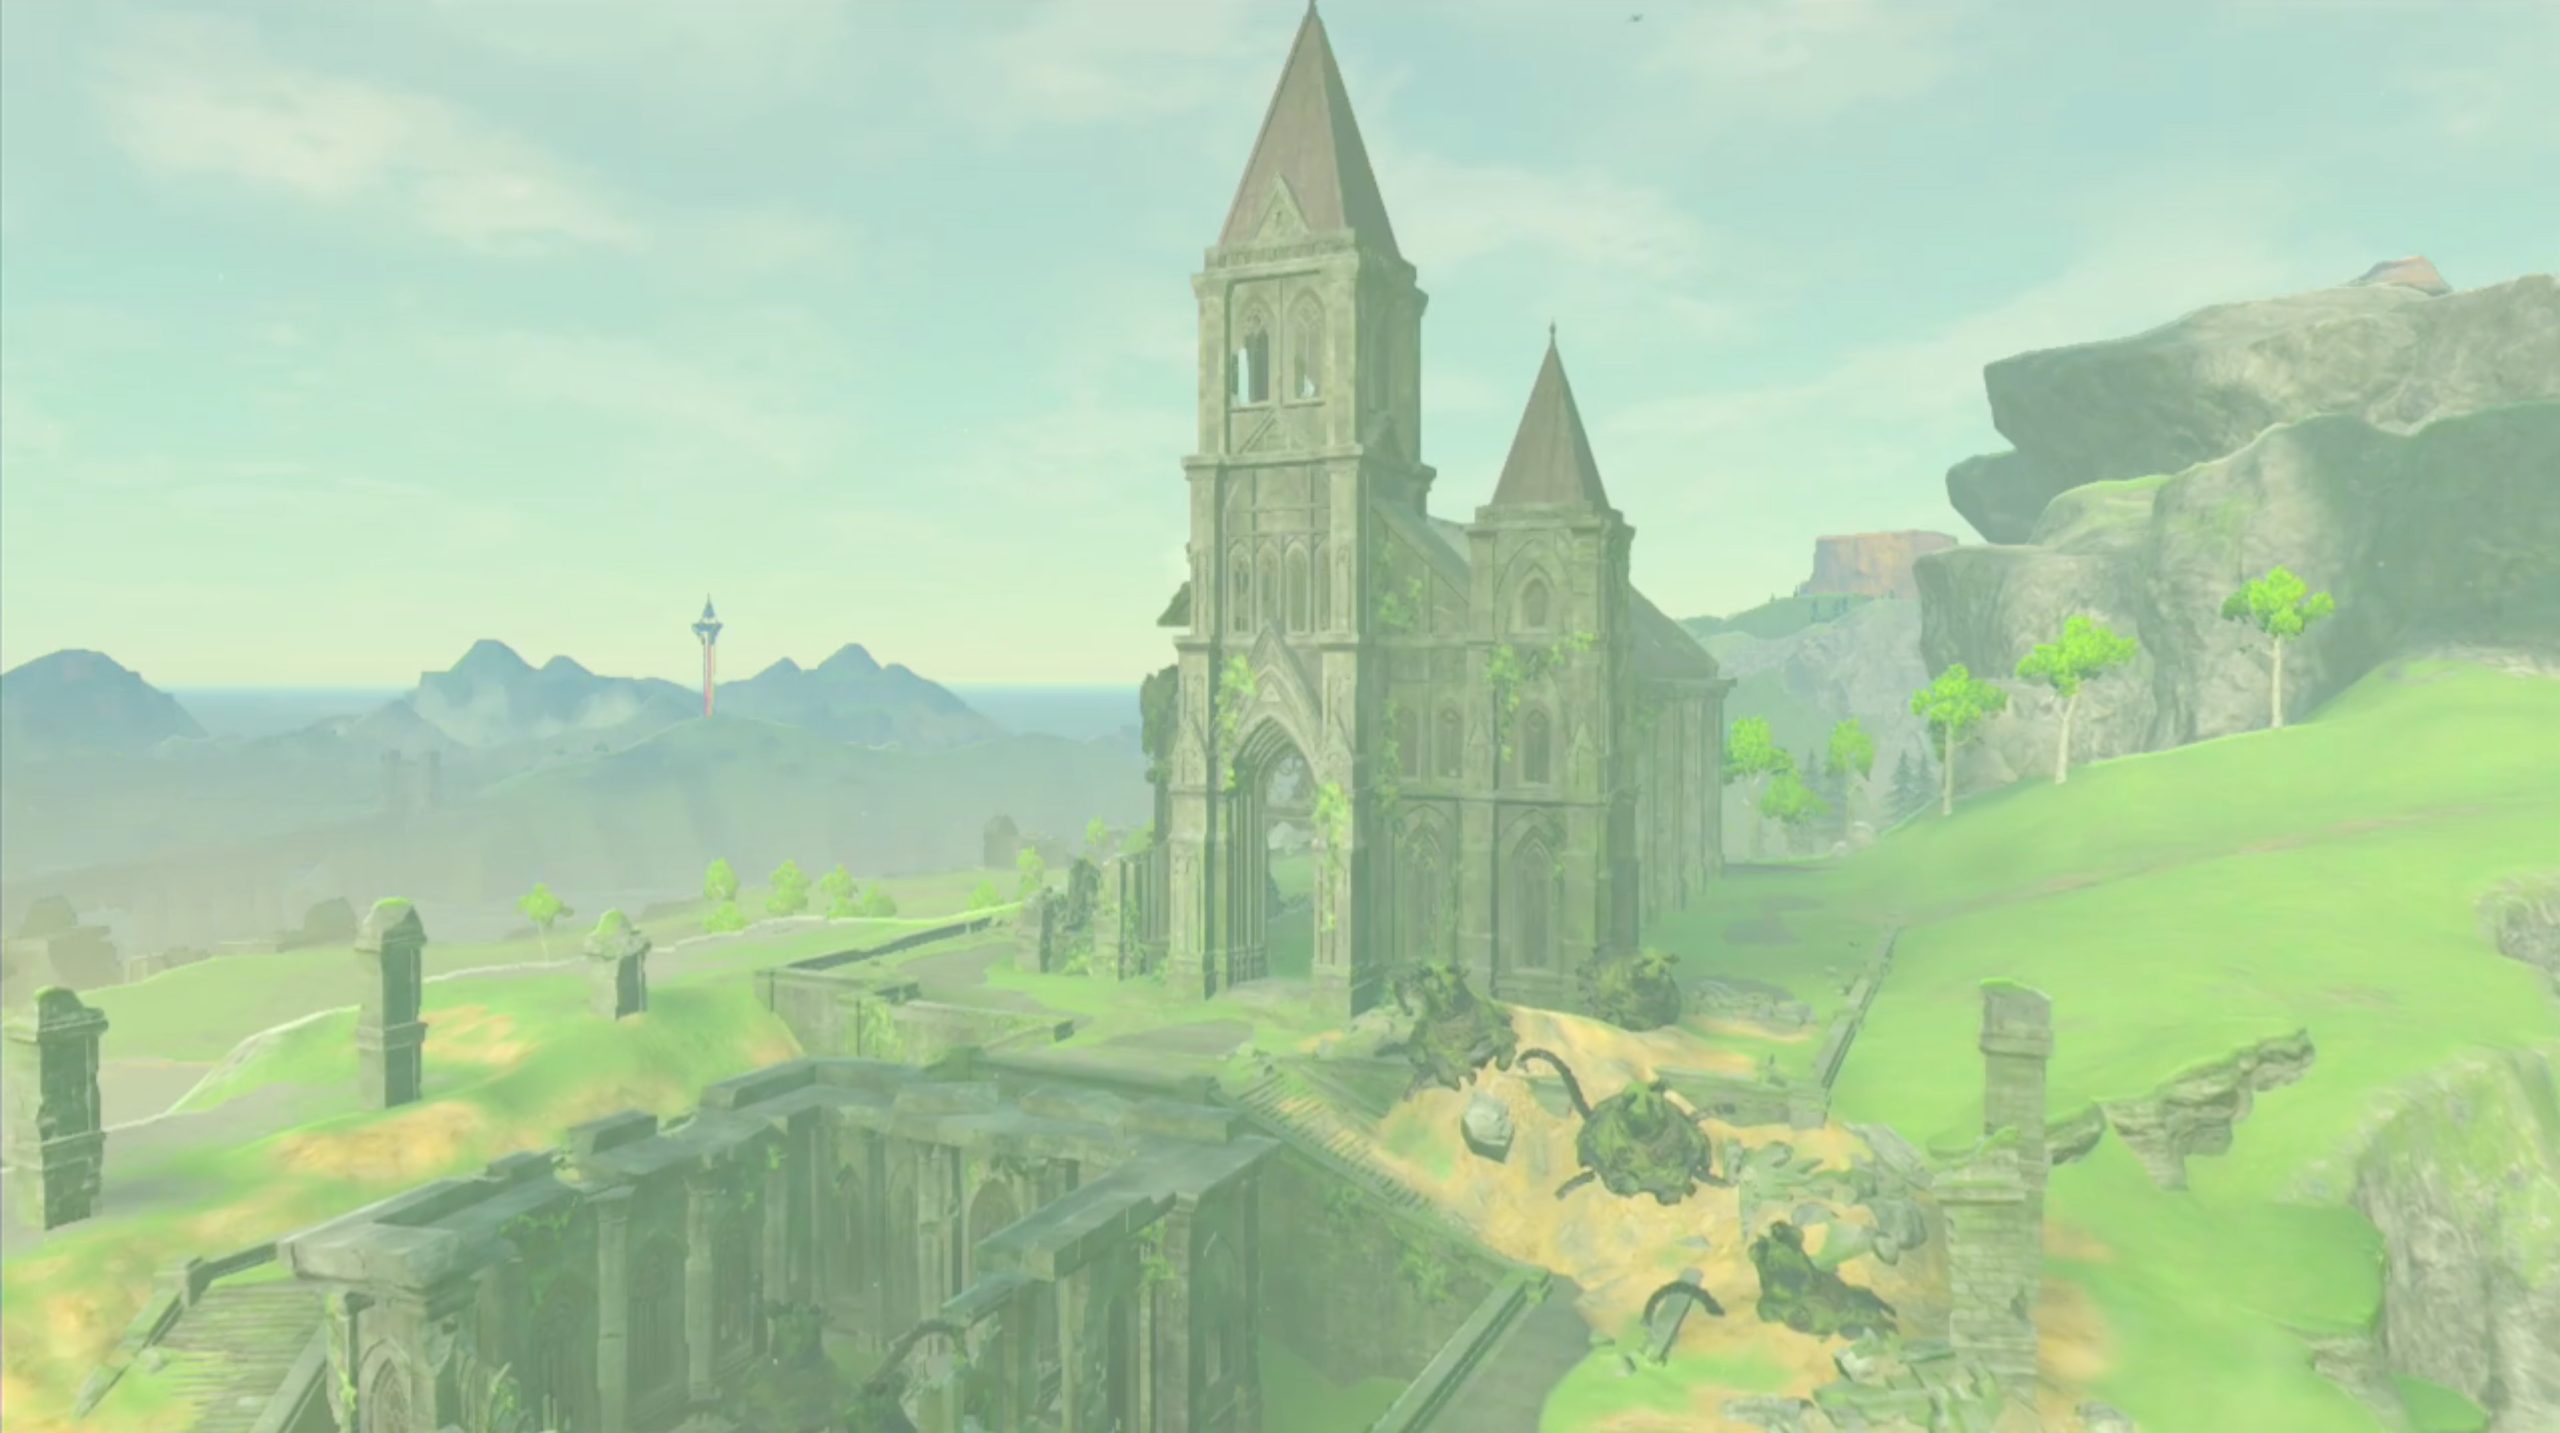 Nintendo reveals Temple of Time in new Breath of the Wild video